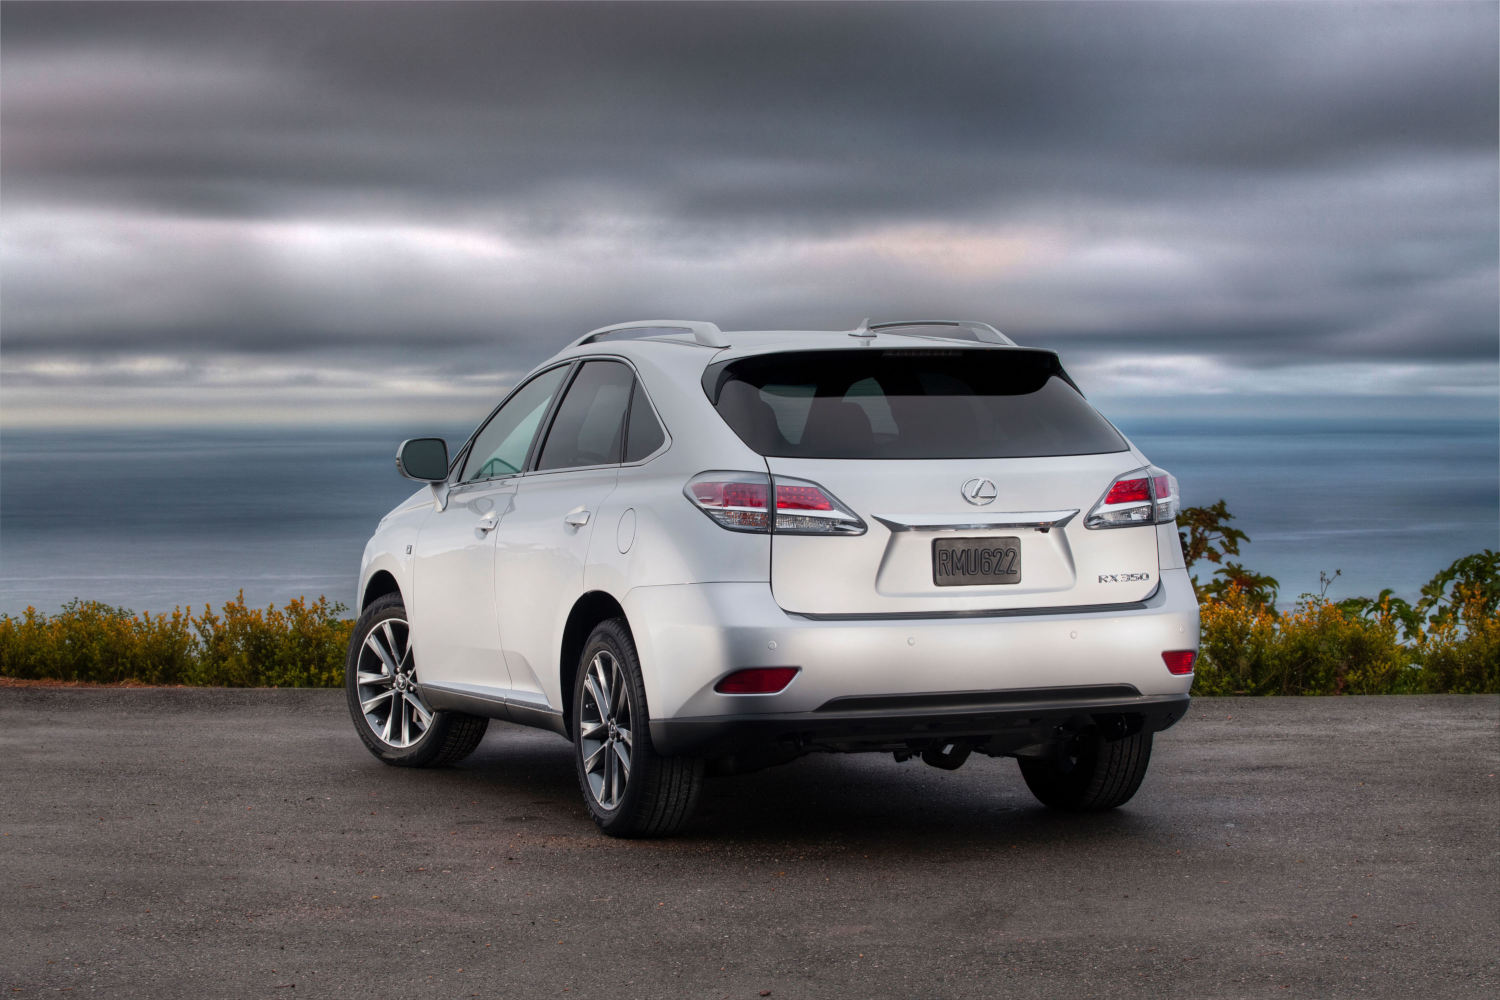 This Lexus RX is one of the most reliable SUVs